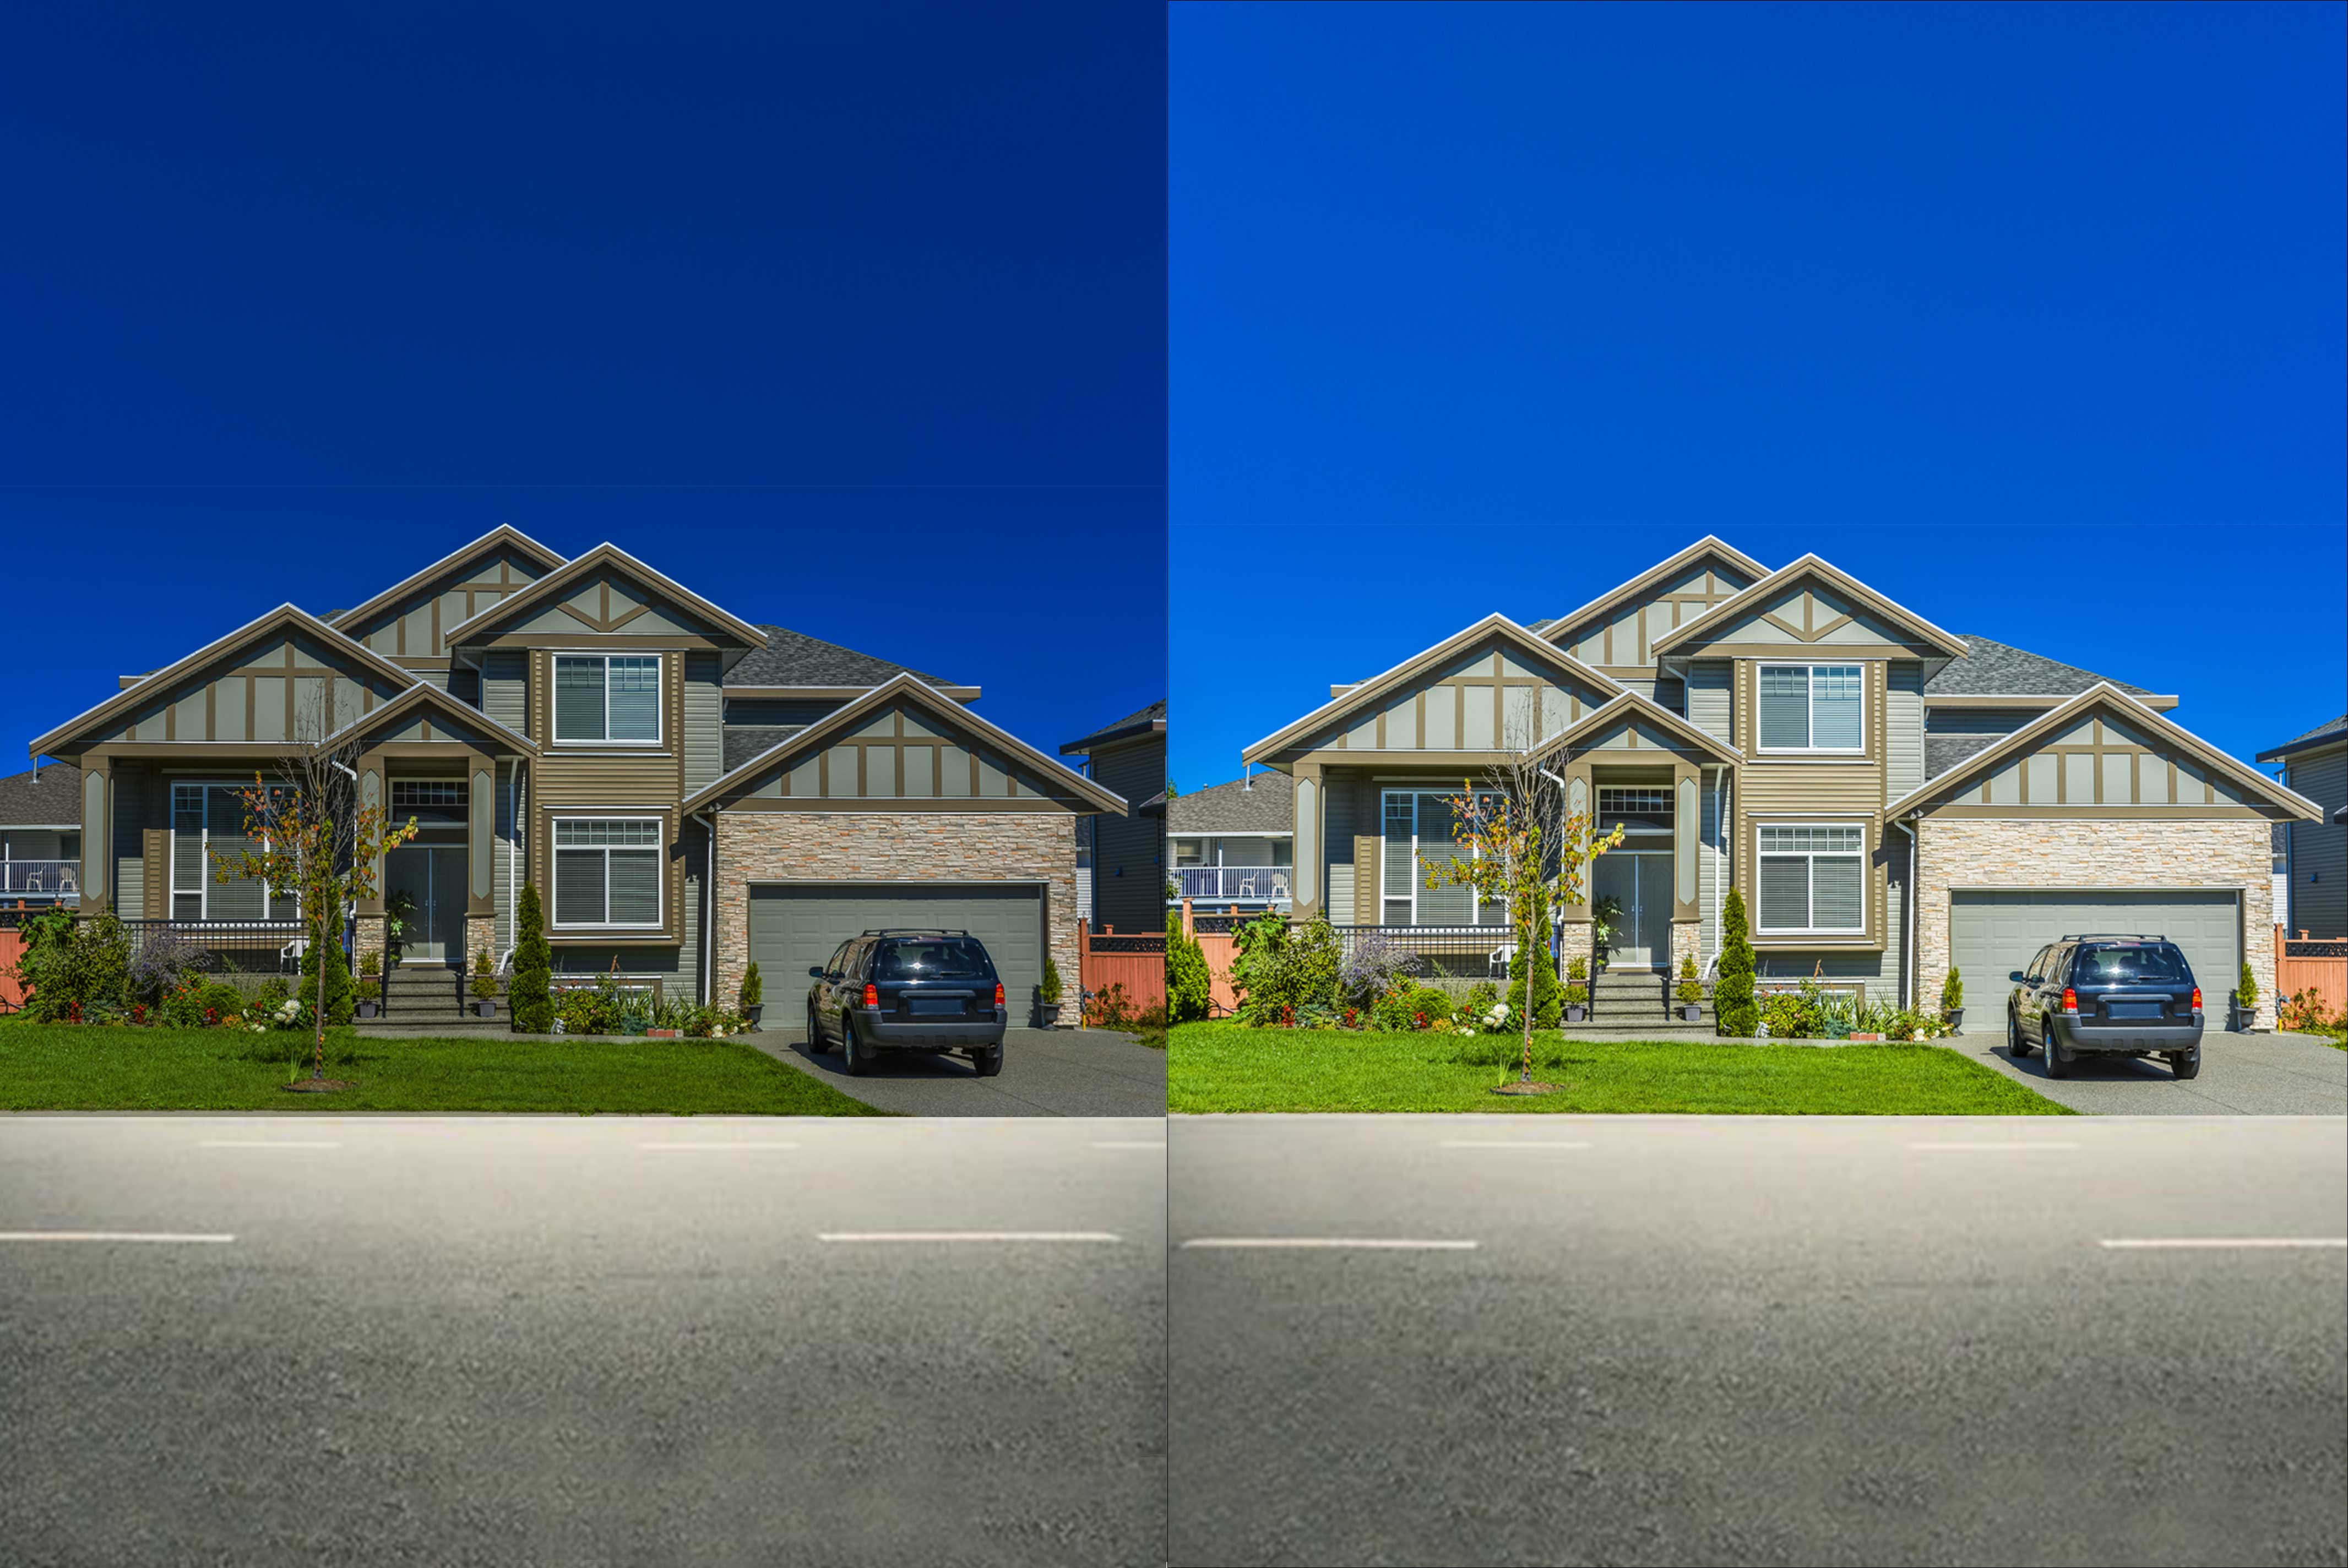 Simple Real estate photo